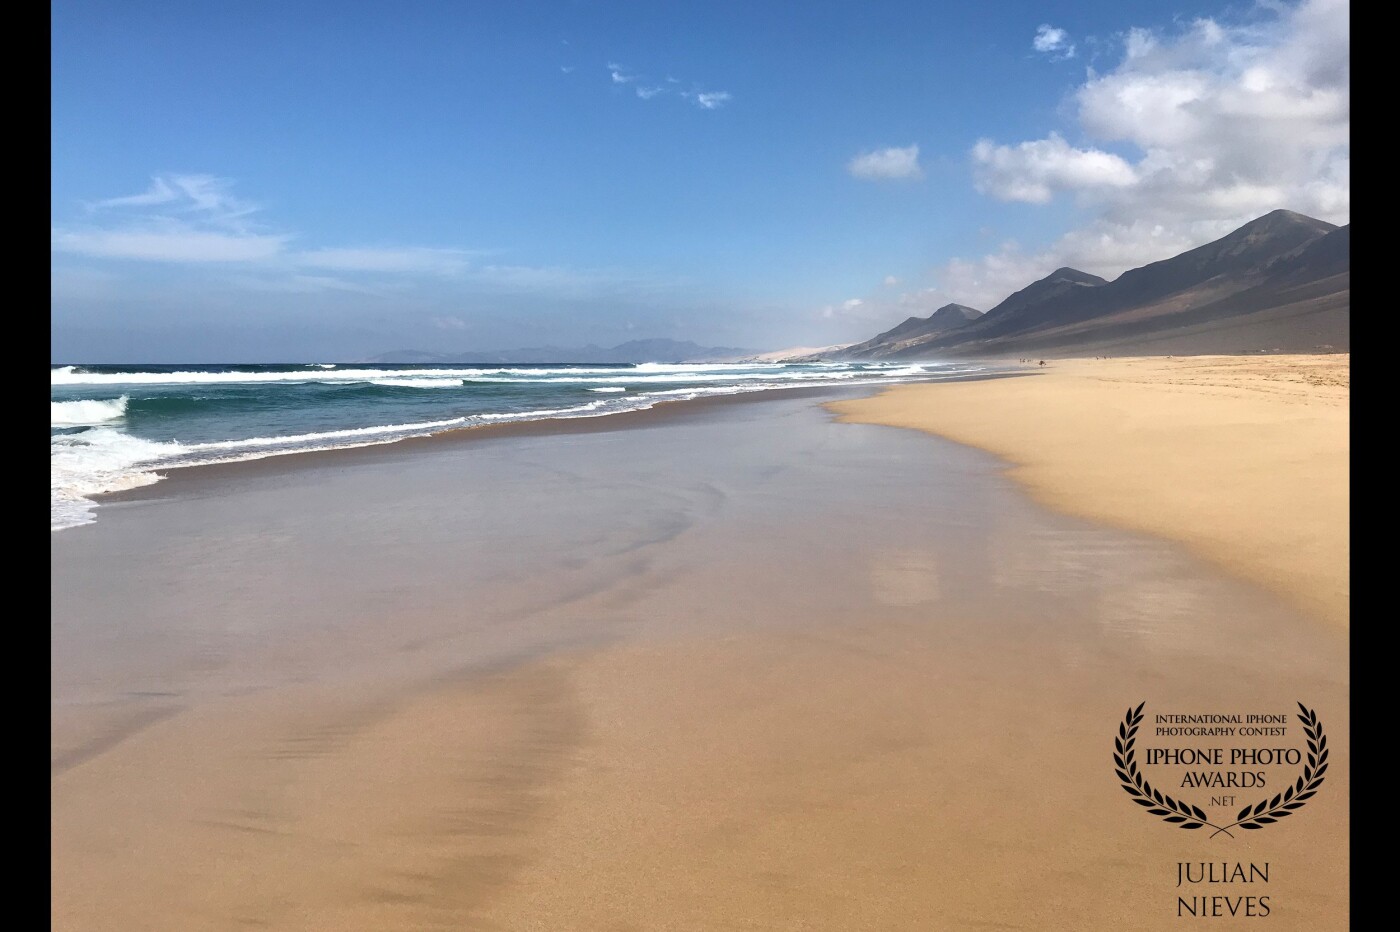 The paradisiacal and endless beaches of Cofete, located in one of the most beautiful and protected enclaves of the island of Fuerteventura, as is the Natural Park of Jandia.